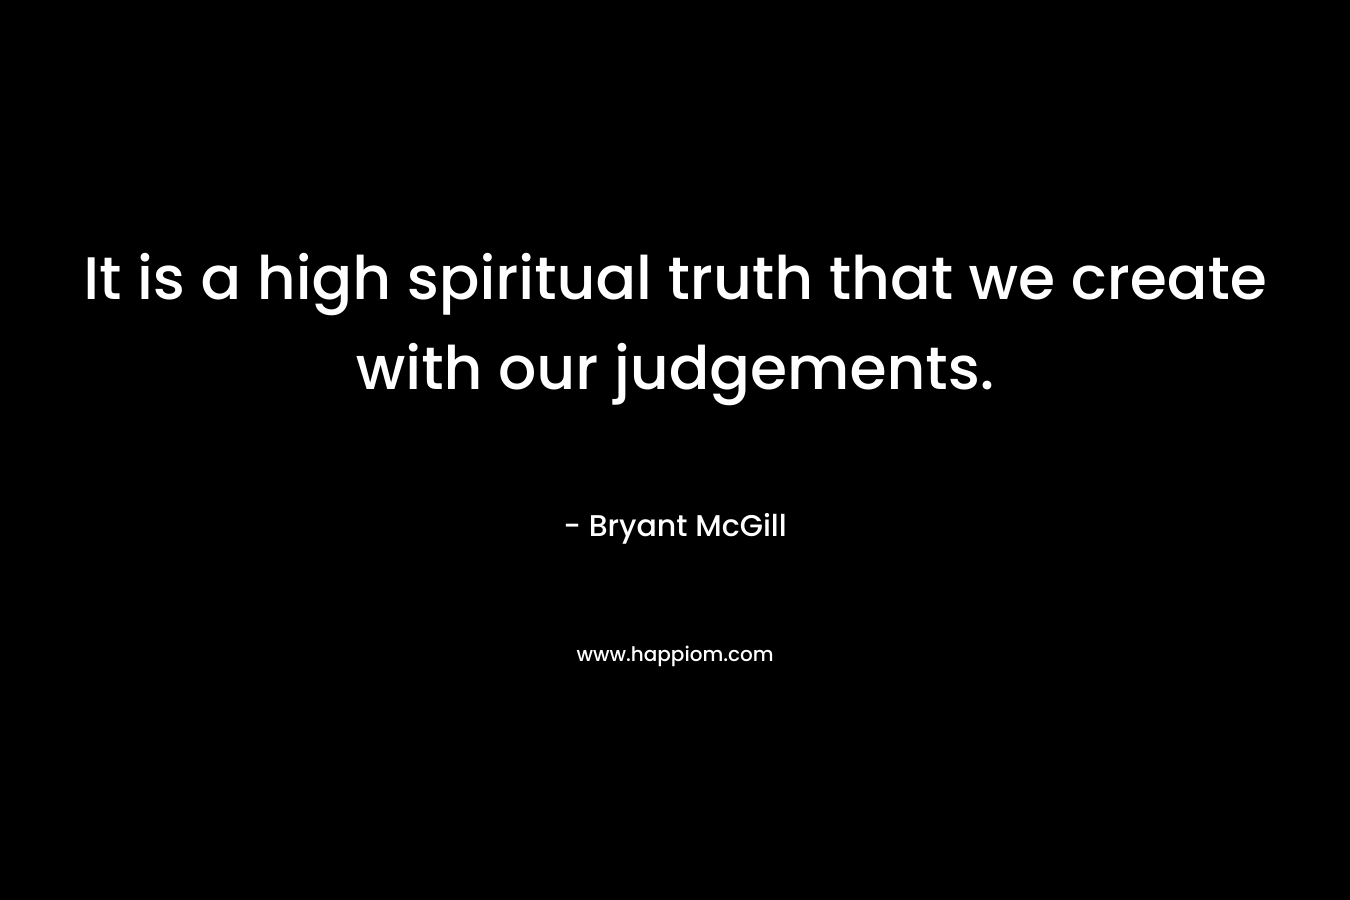 It is a high spiritual truth that we create with our judgements.